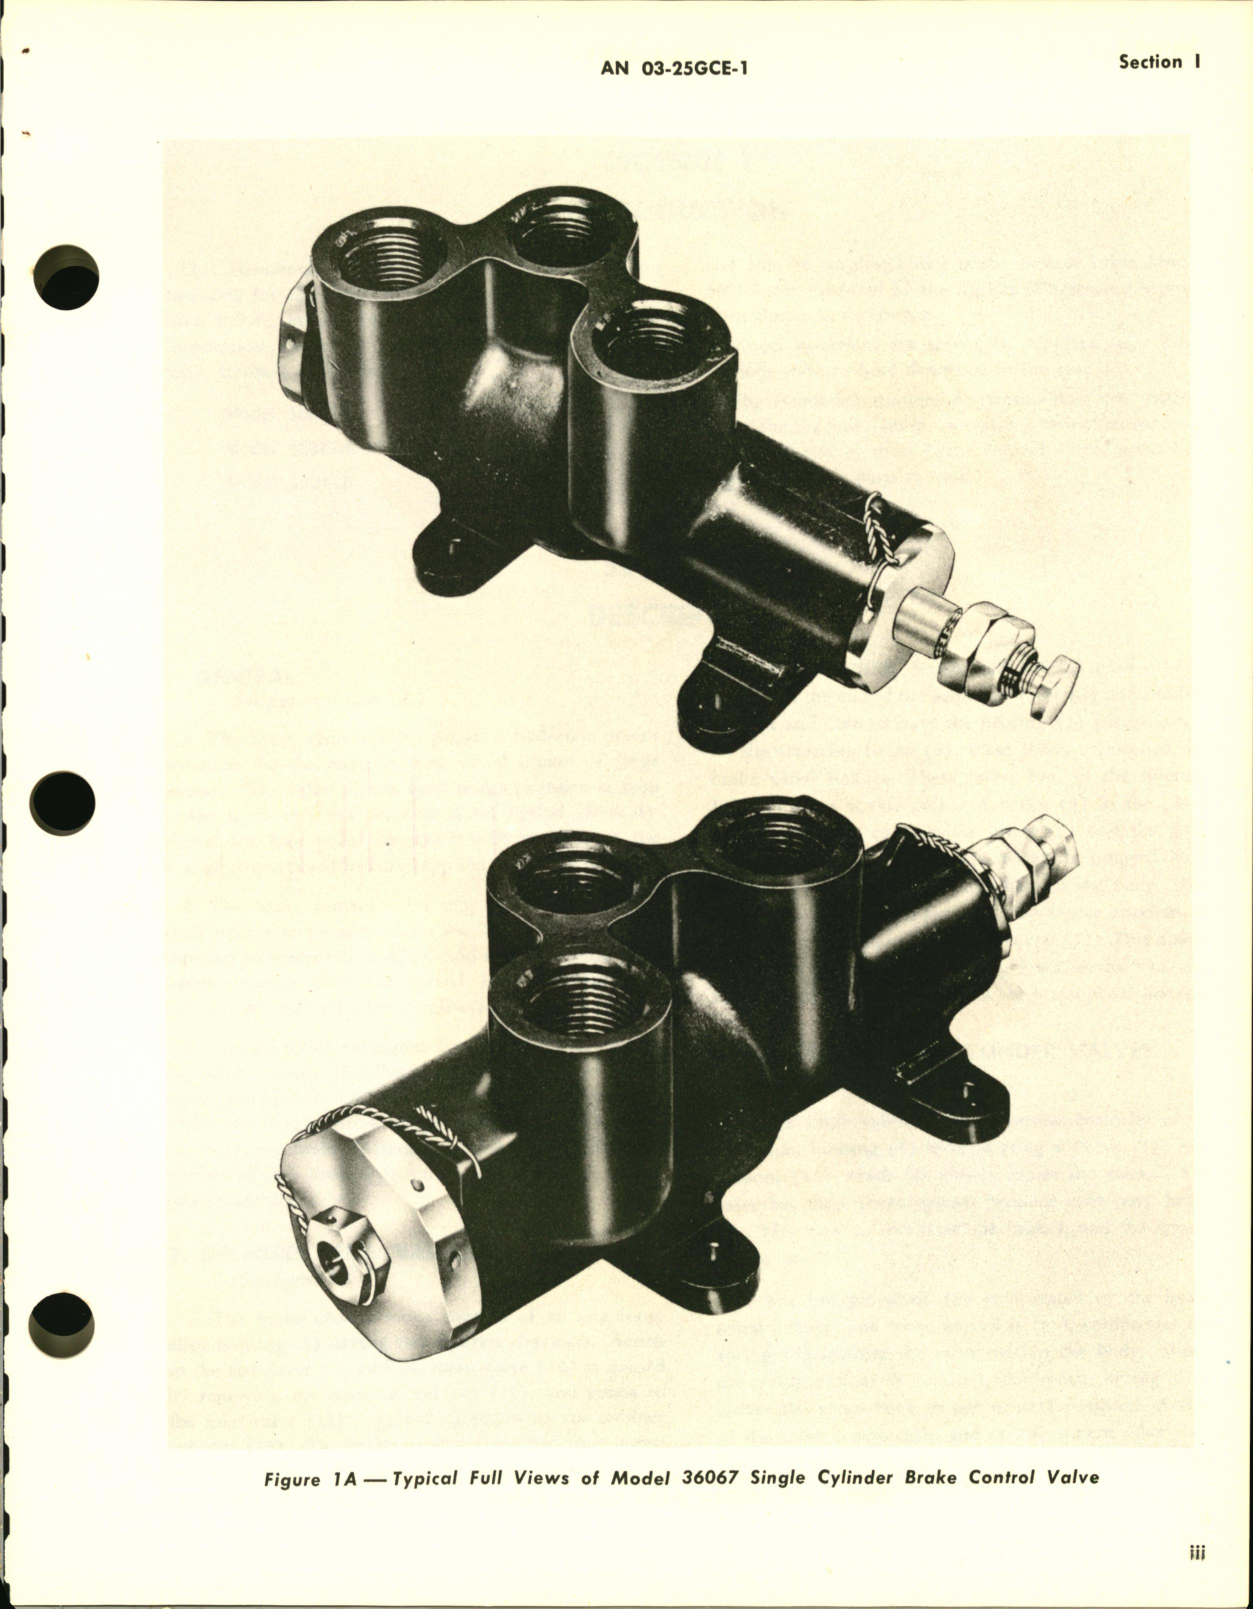 Sample page 5 from AirCorps Library document: Operation, Service, & Overhaul Instructions with Parts Catalog for Brake Control Valves